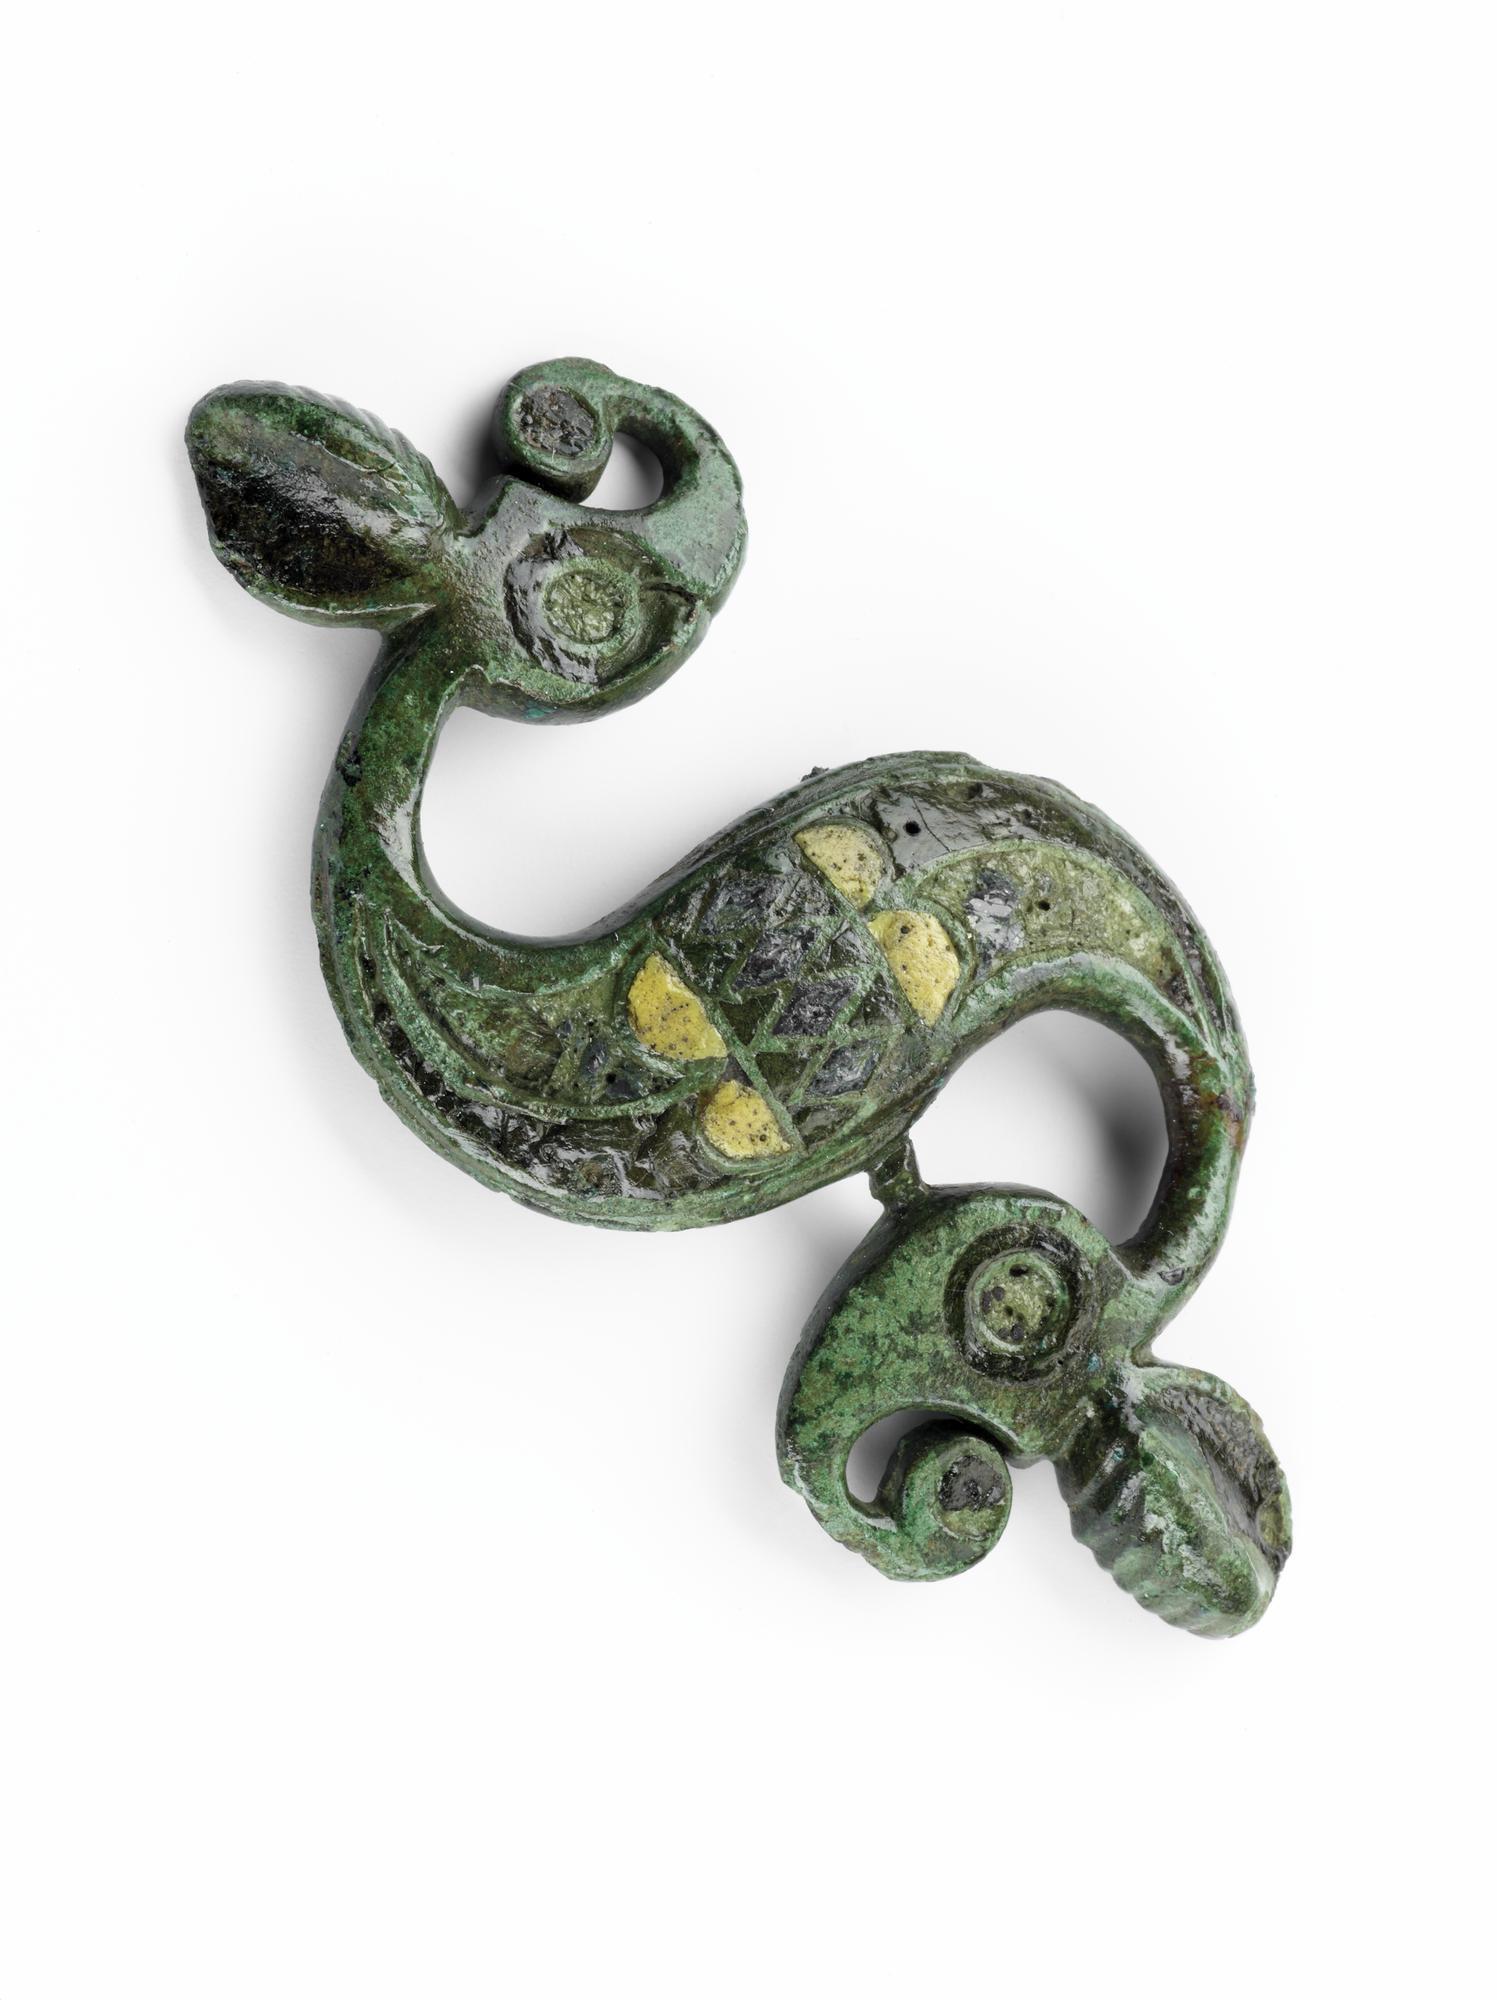 Image of Dragonesque fibula (brooch) of bronze, decorated with blue, red and yellow enamel, from the Roman site at Newstead © National Museums Scotland